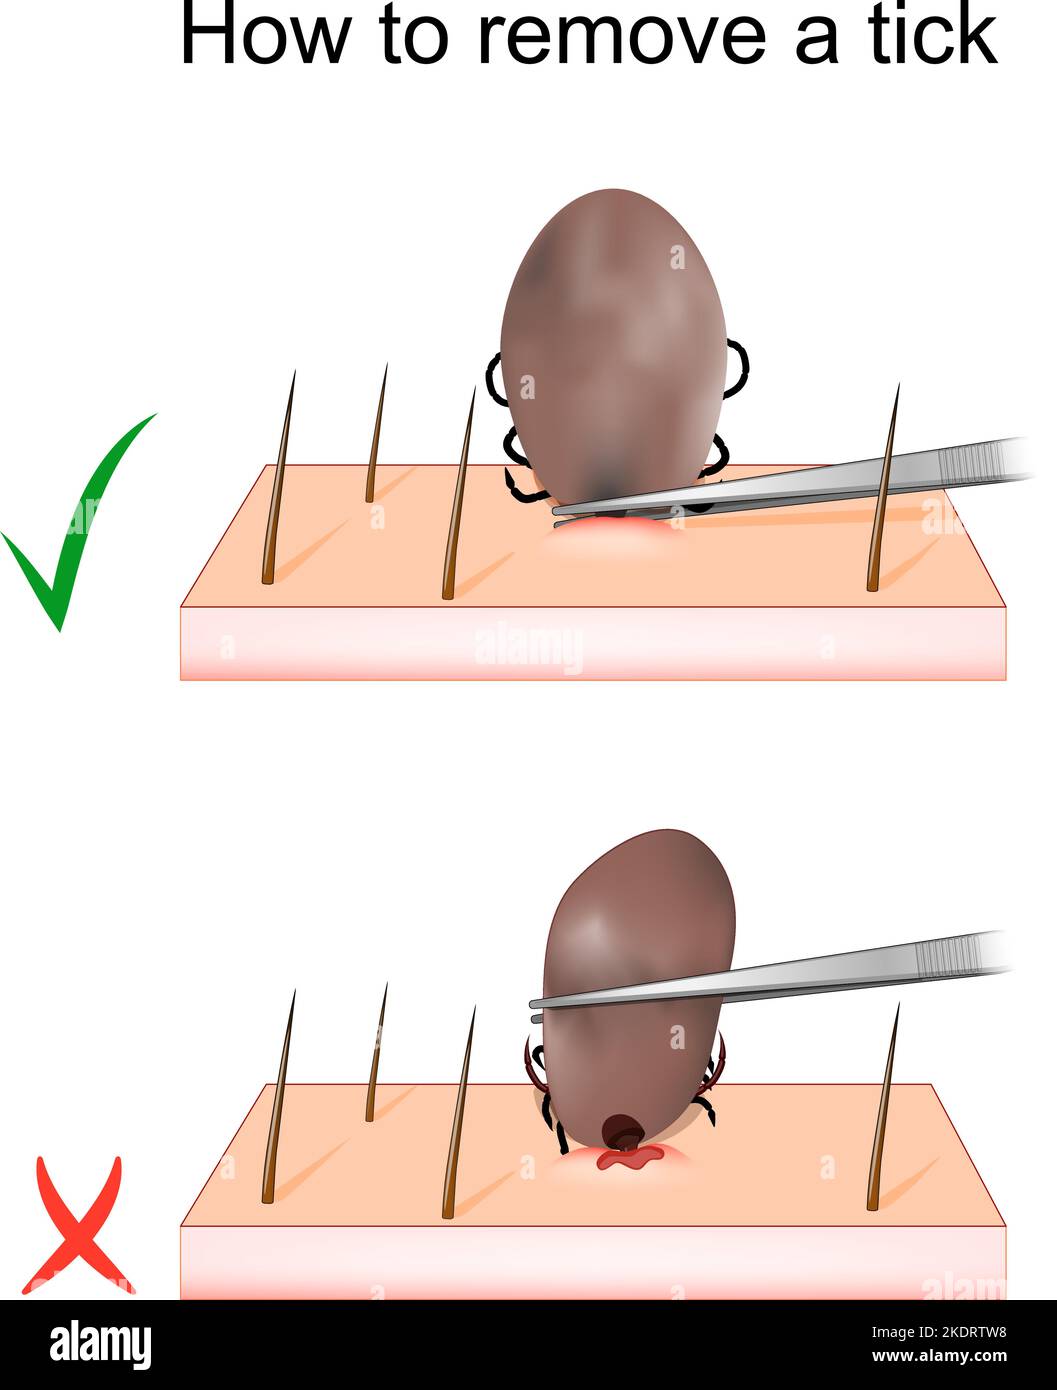 How to remove a tick. mite Removal. Vector illustration Stock Vector